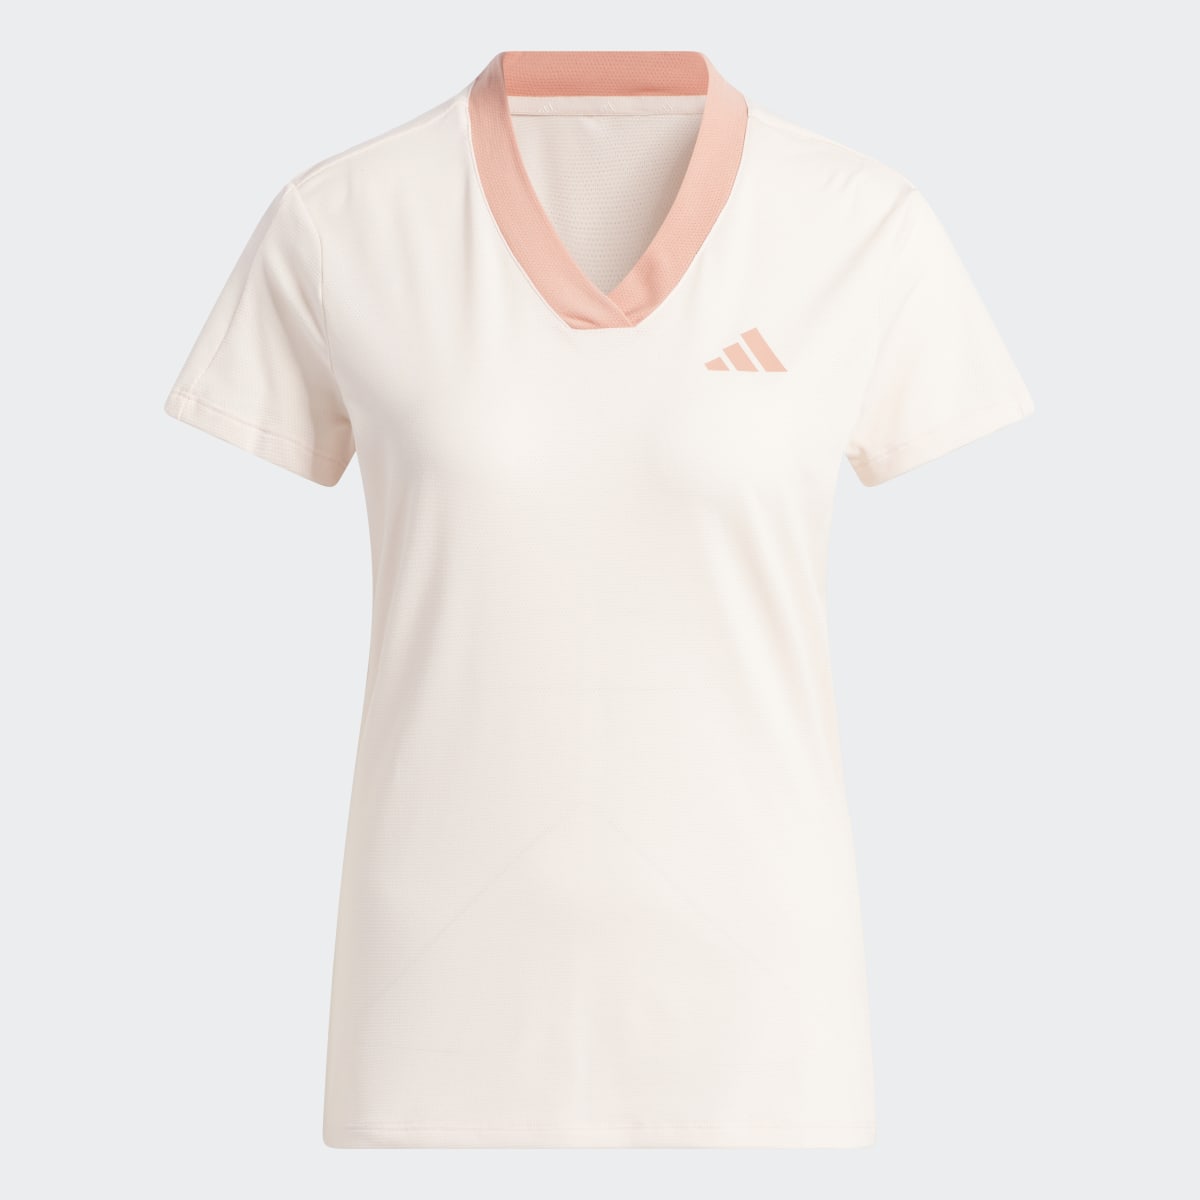 Adidas Camisola Made With Nature. 5